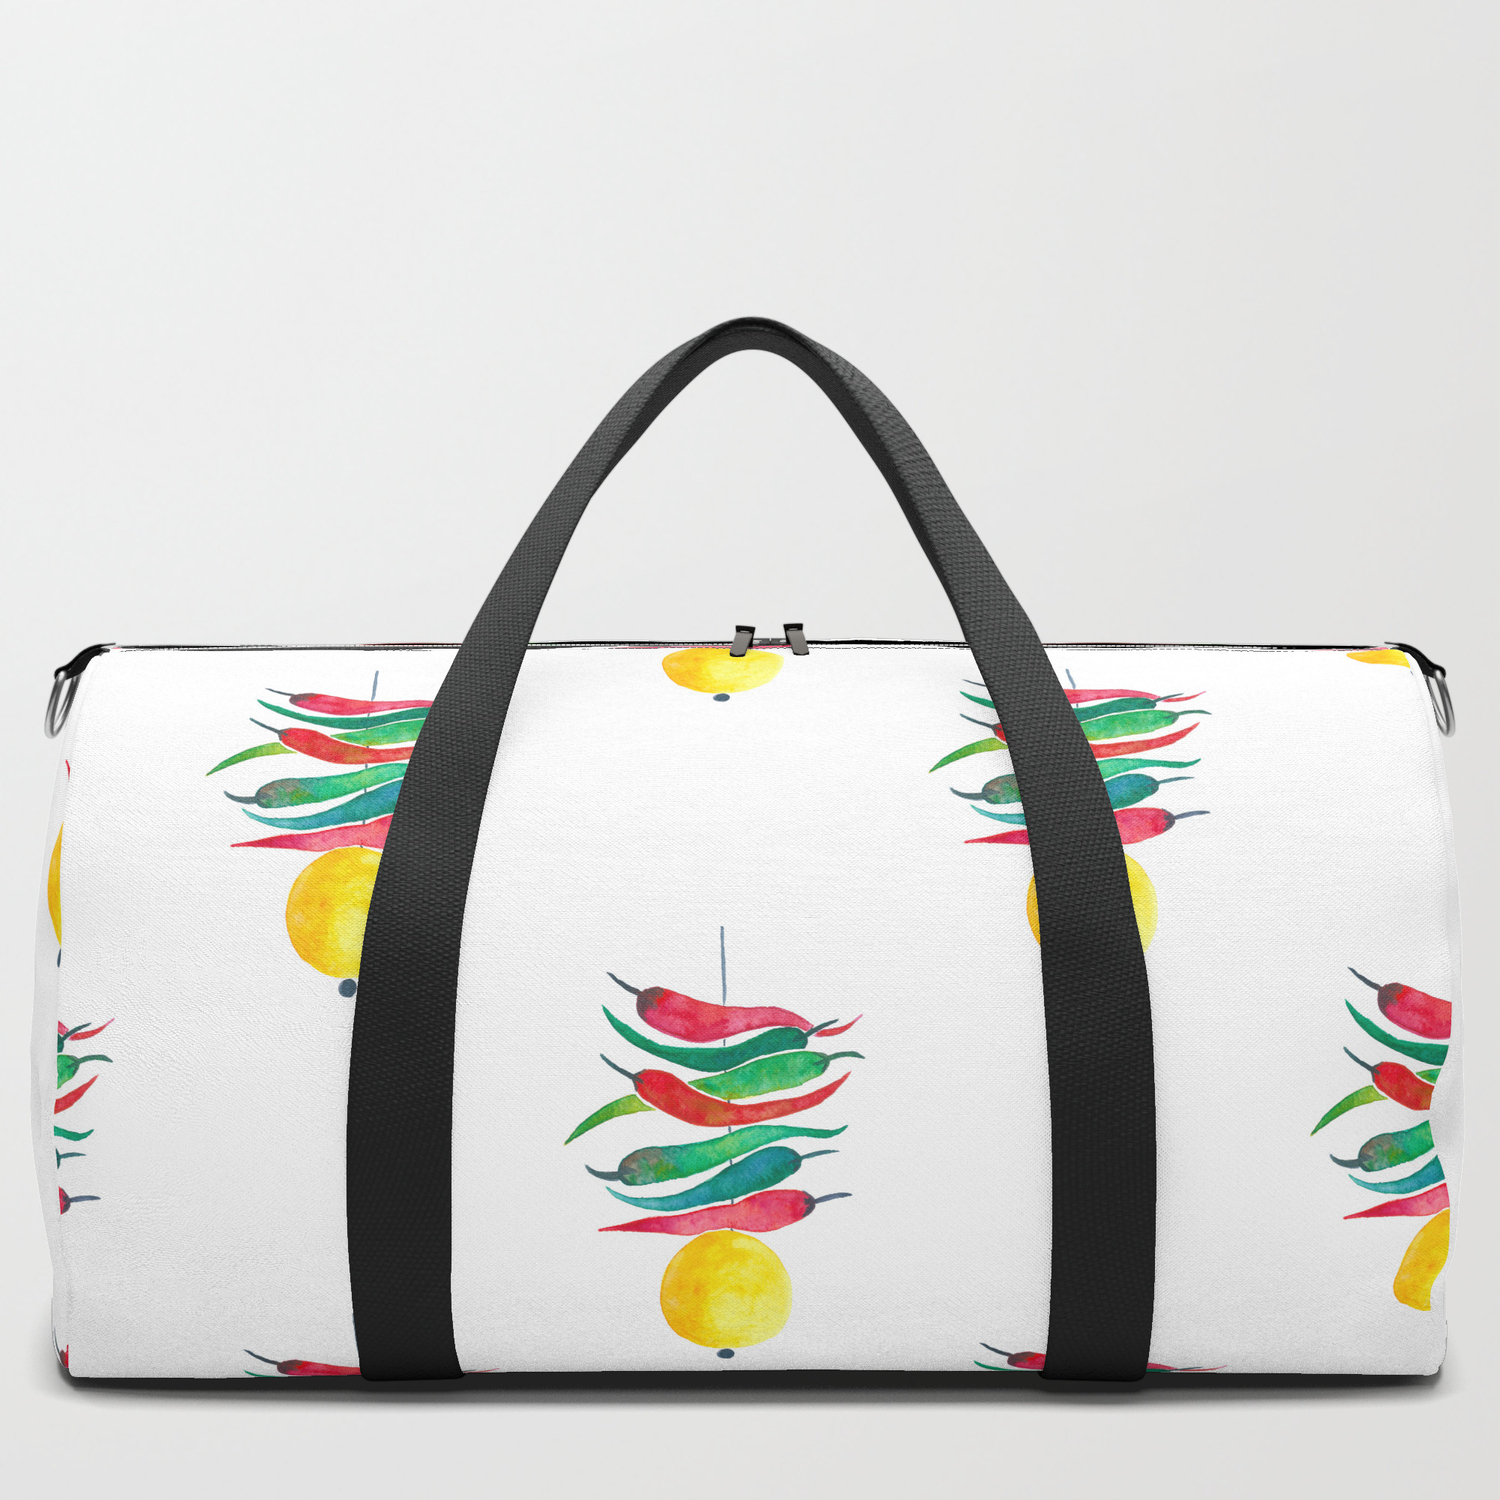 CHILLI PEPPER Lovely Ladies Bag  with Adjustable Strap in Lemon Yellow